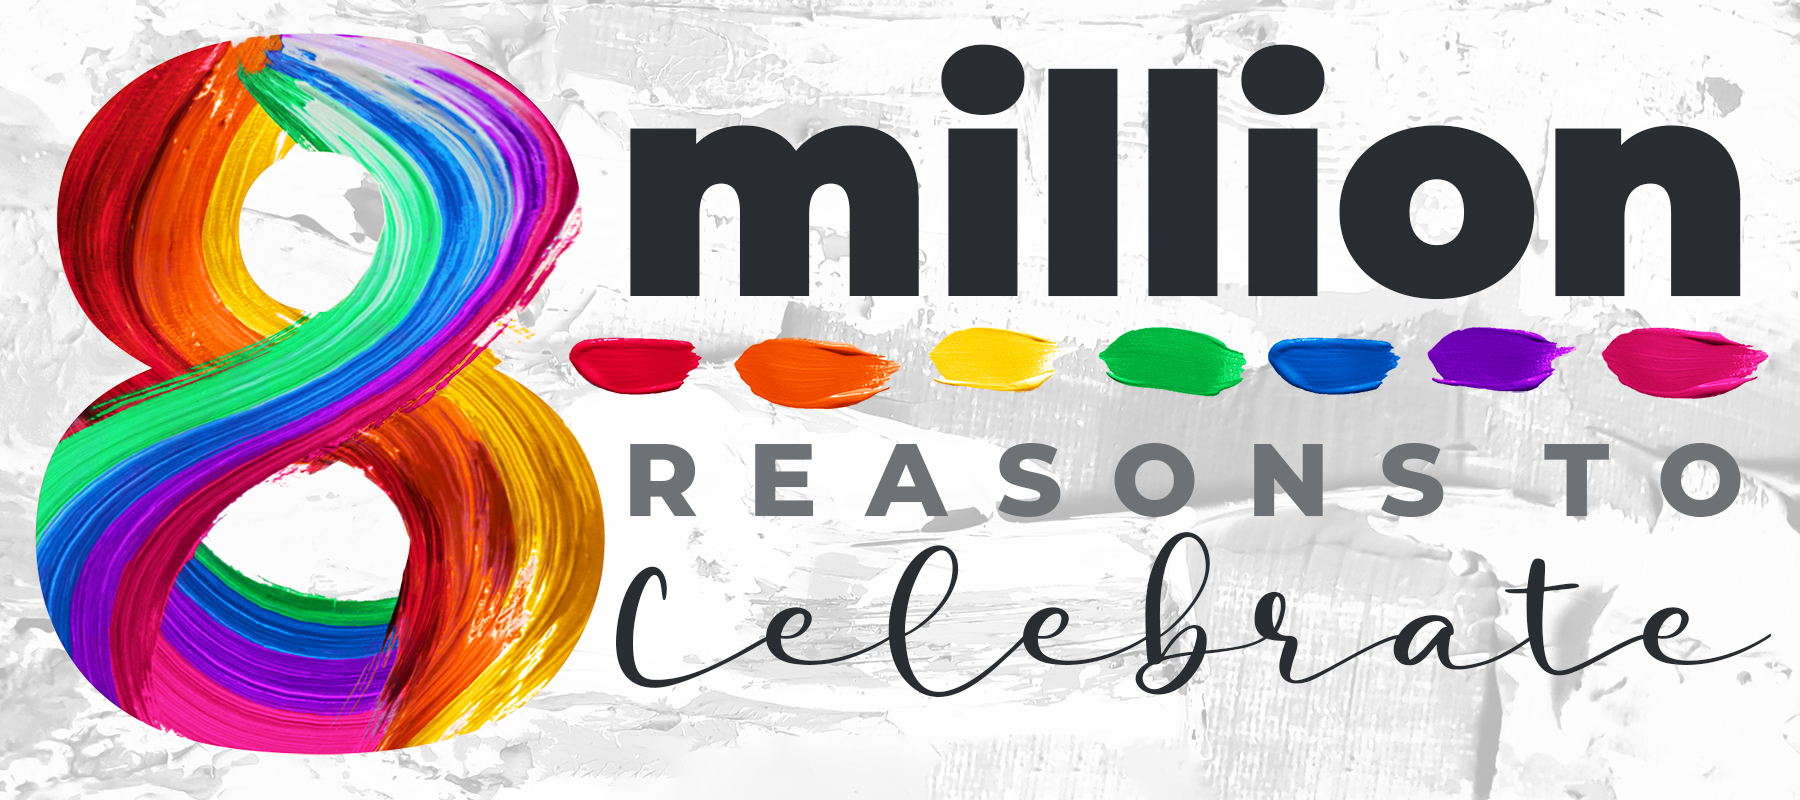 a decorative image celebrating "8 million reasons to celebrate", with the 8 created with wild & free paint streaks of rainbow colored paint.